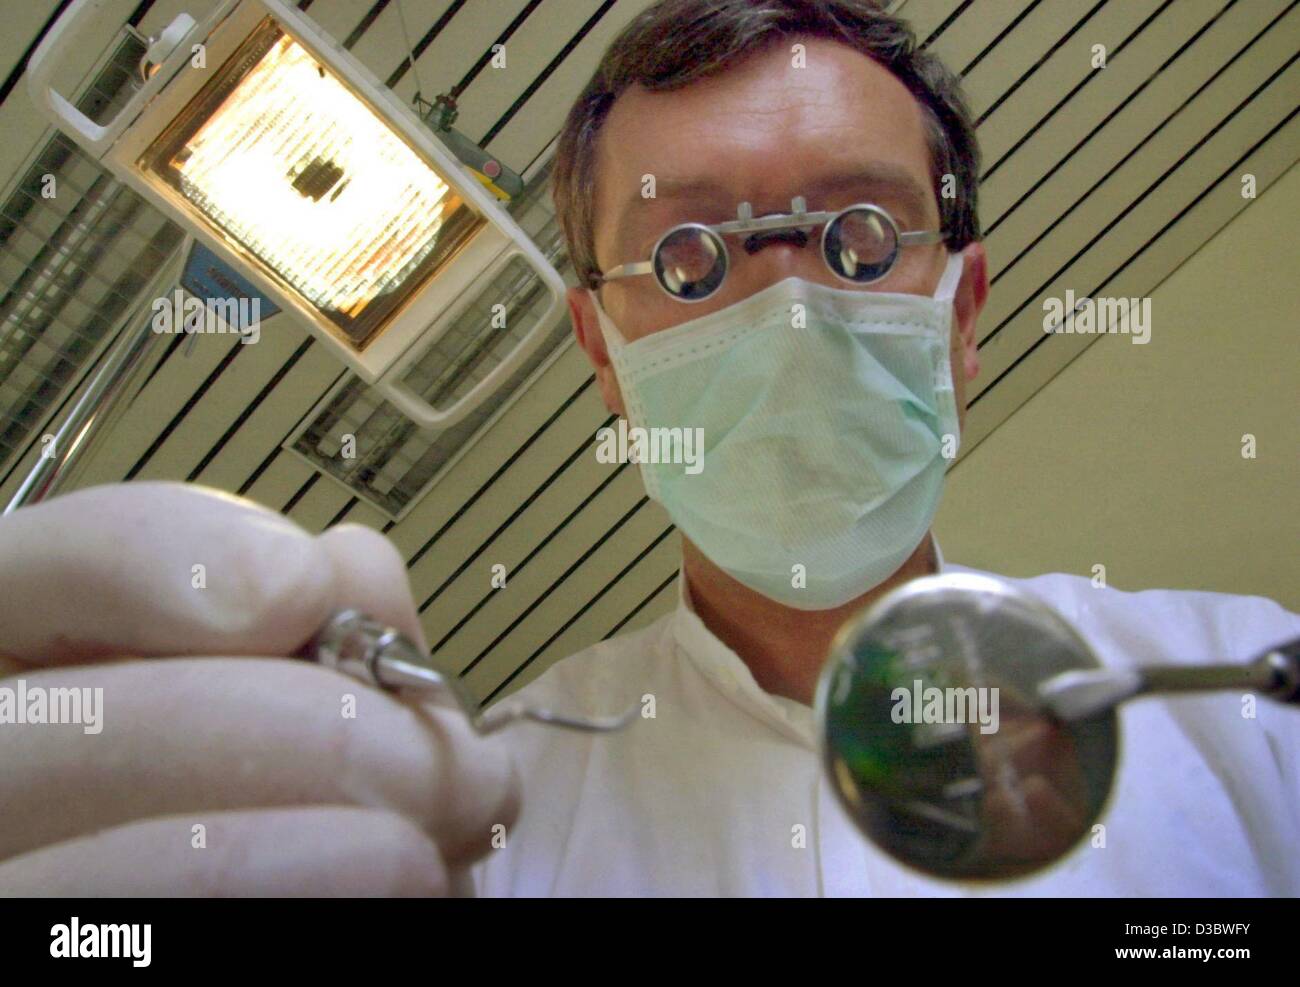 (dpa) - Dentist Rainer Baldauf simulates an examination of teeth while wearing a mask and magnifying glasses in a practice in Rimpar, Germany, 30 July 2003. The envisaged healthcare reform of the German government will result in deep cuts in the health and welfare systems. Germany's expensive health Stock Photo